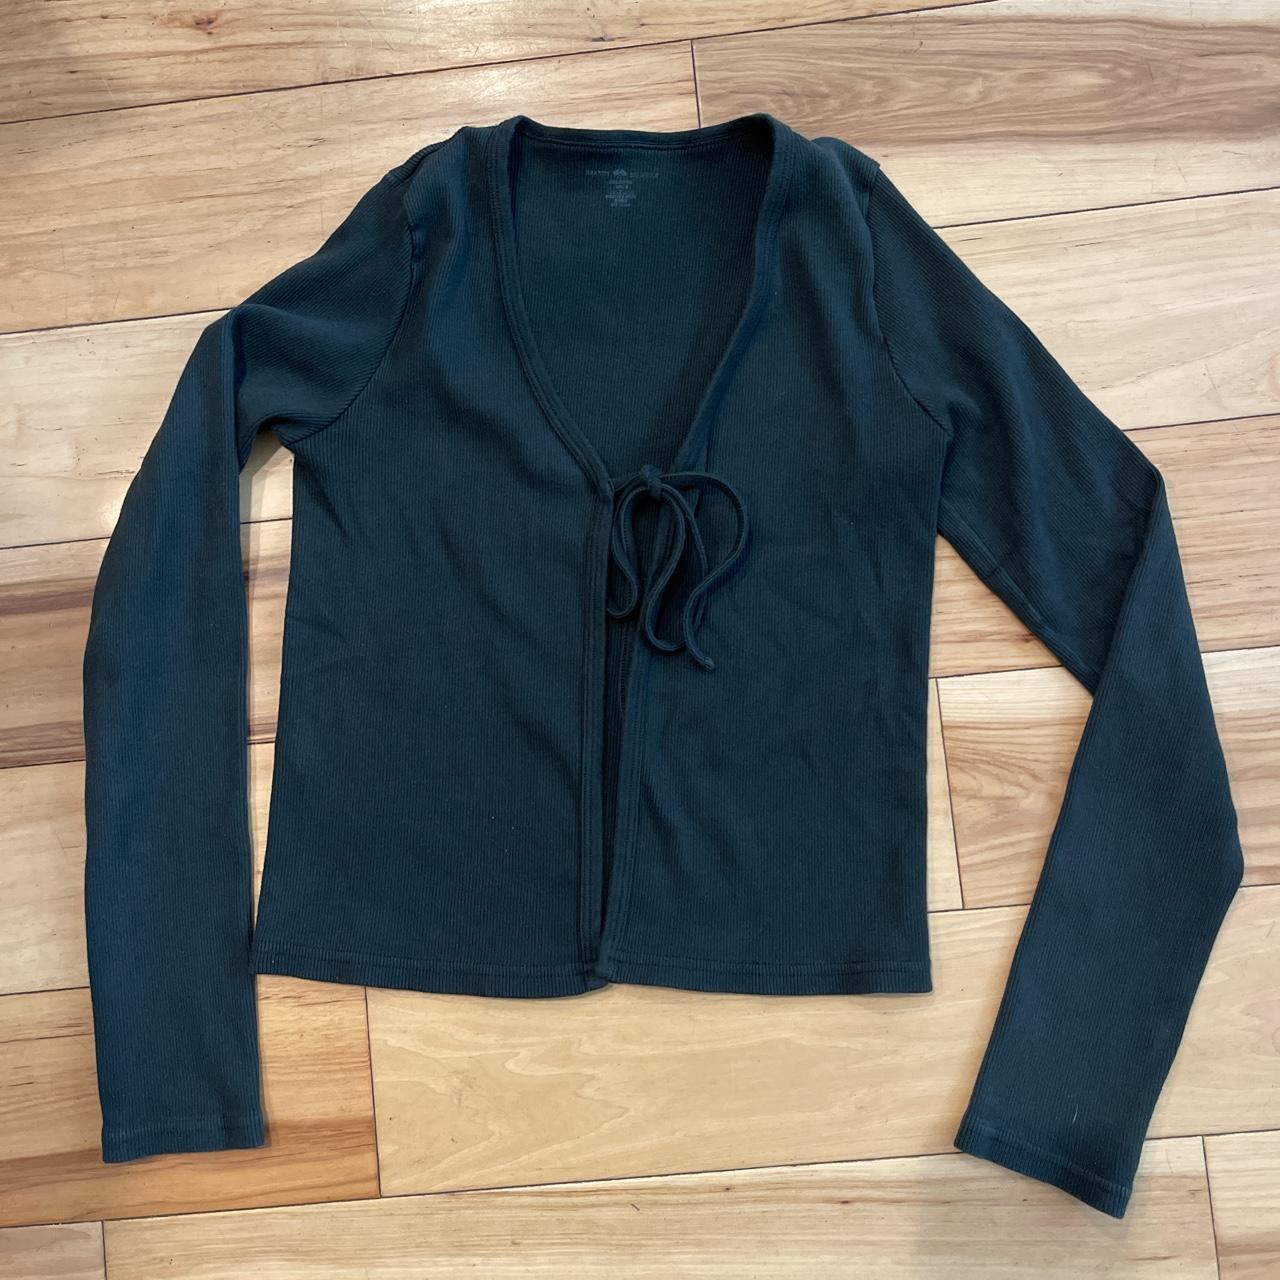 Are any of these Brandy cardigans worth it/good quality? : r/BrandyMelville